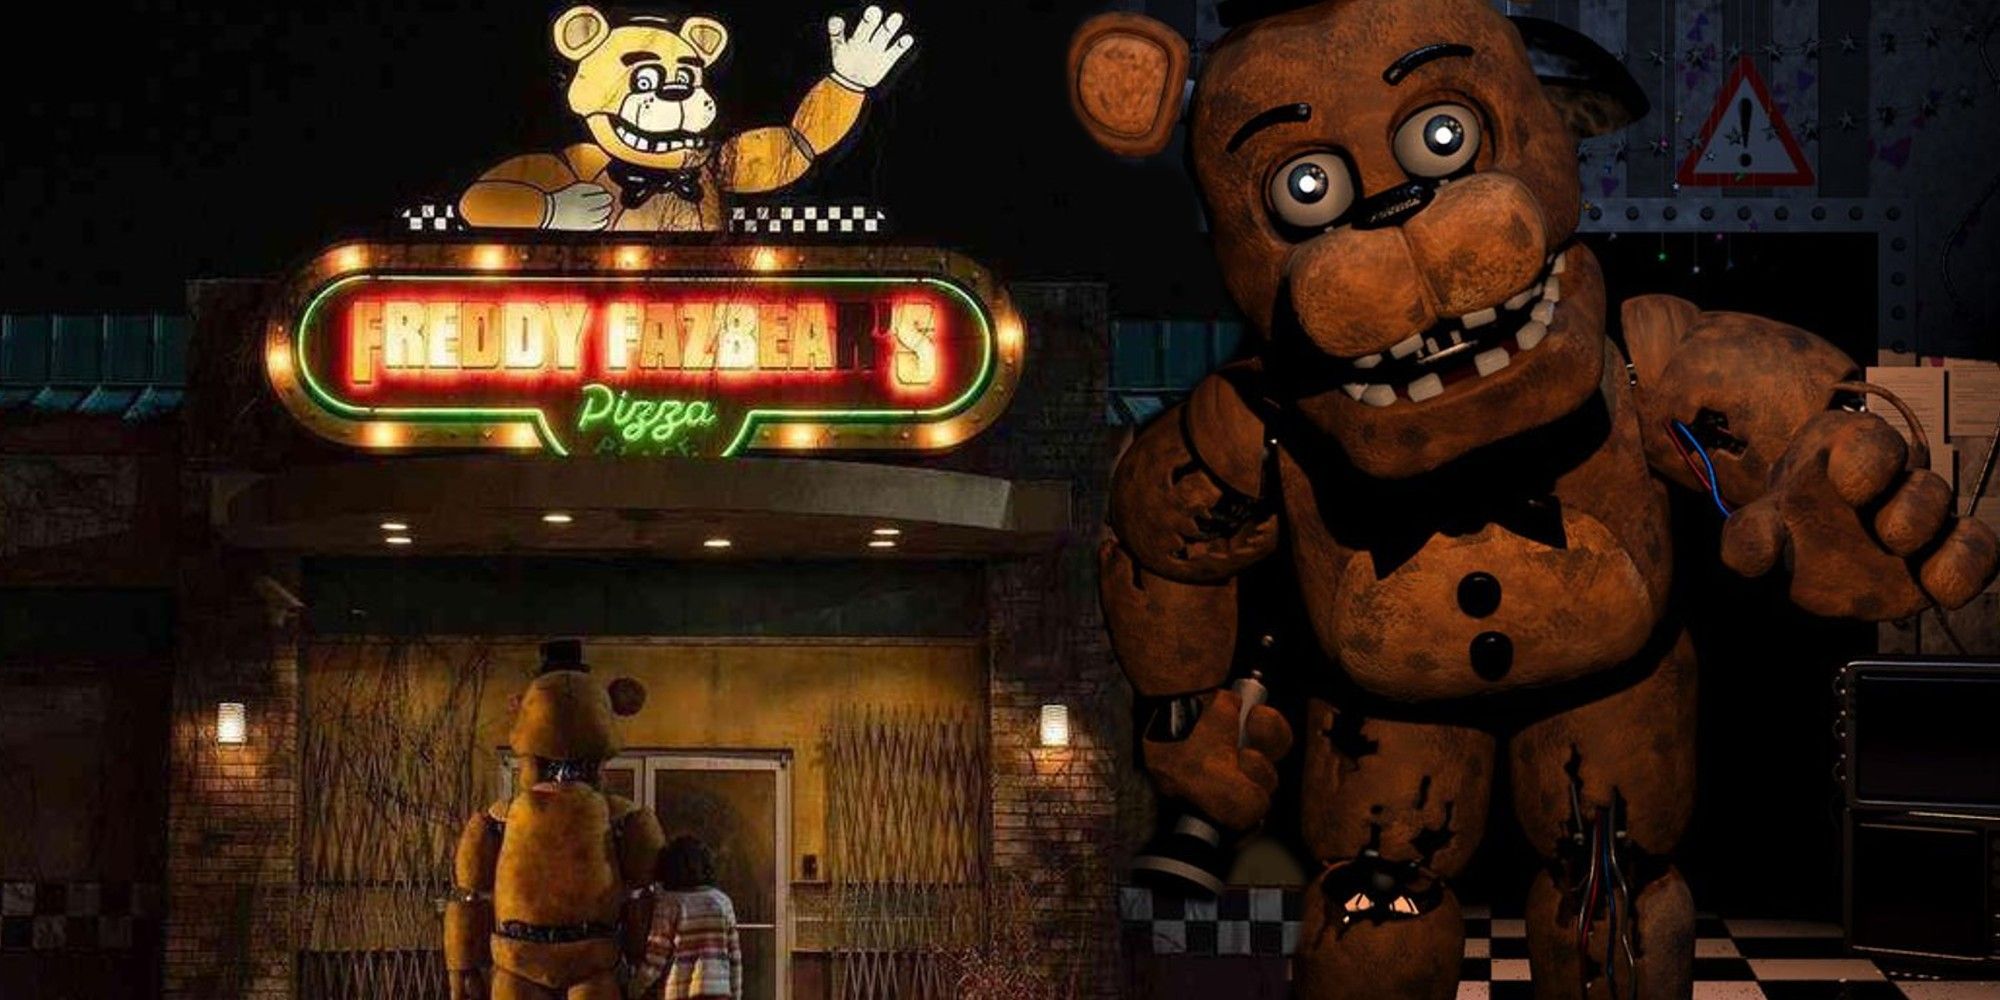 Blended image of Freddy outside the pizza and a scary Freddy from the game